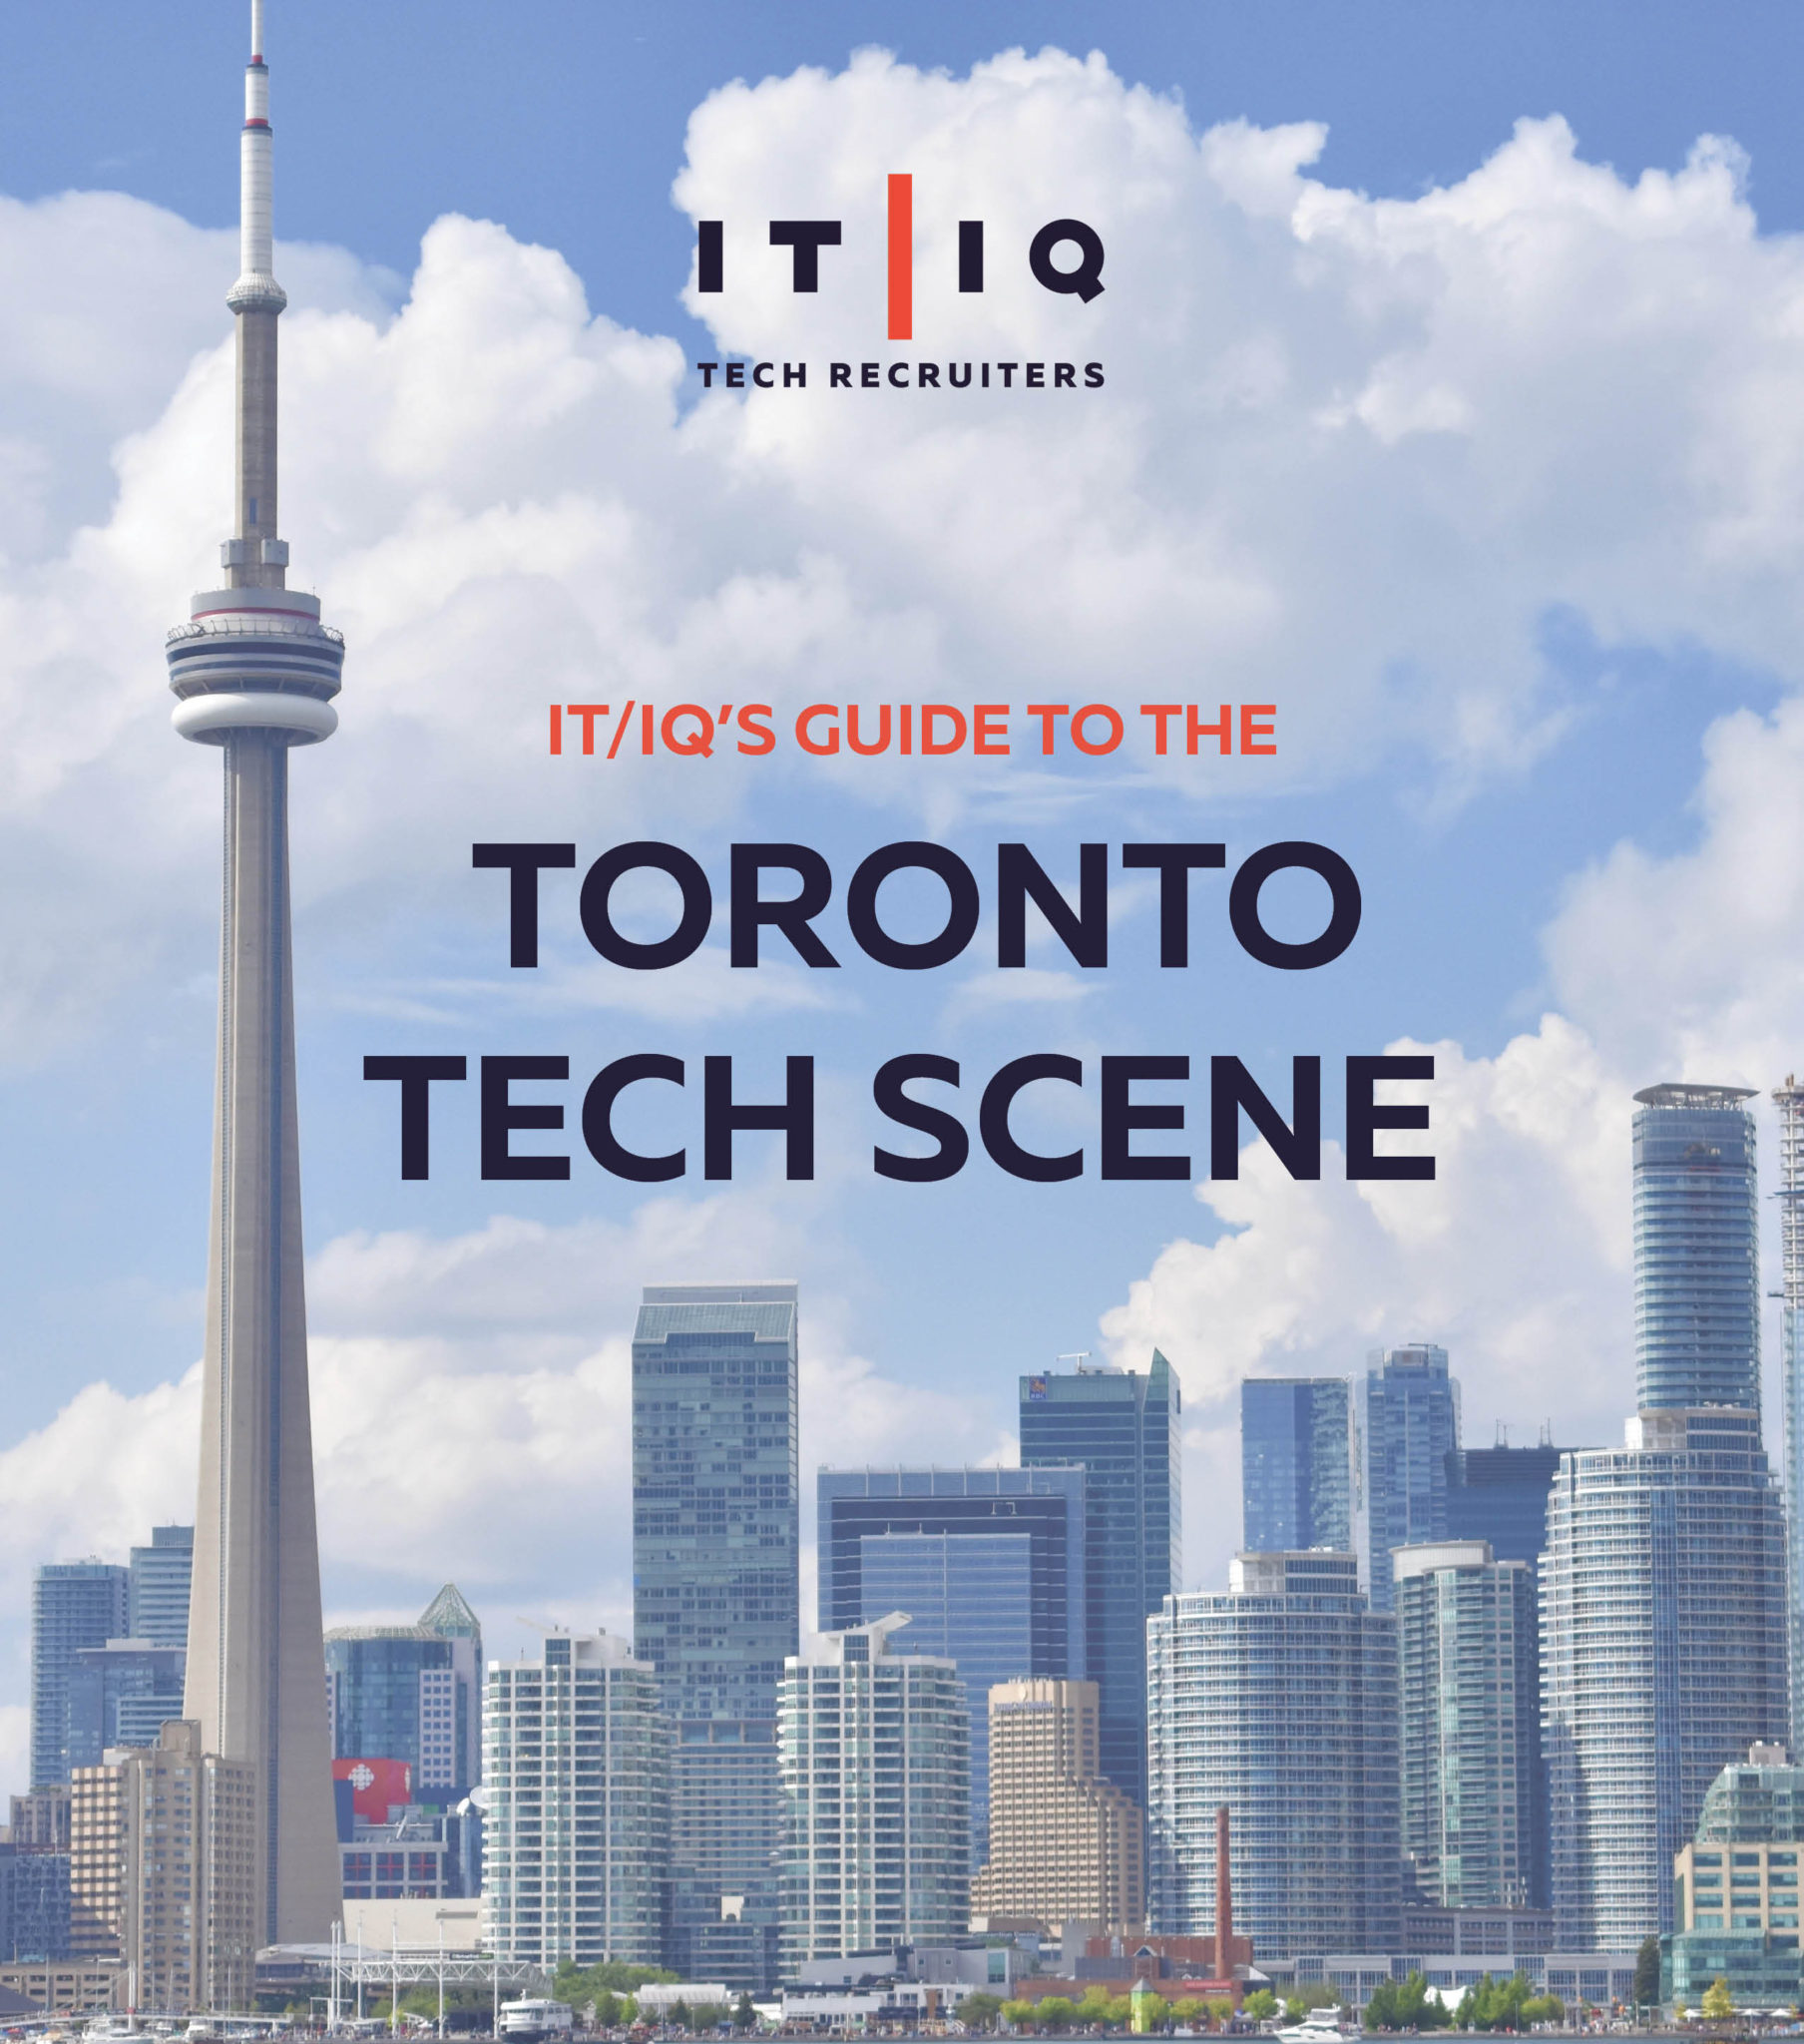 IT/IQ's guide to the Toronto tech scene graphic, photo background features space needle of Toronto, Canada